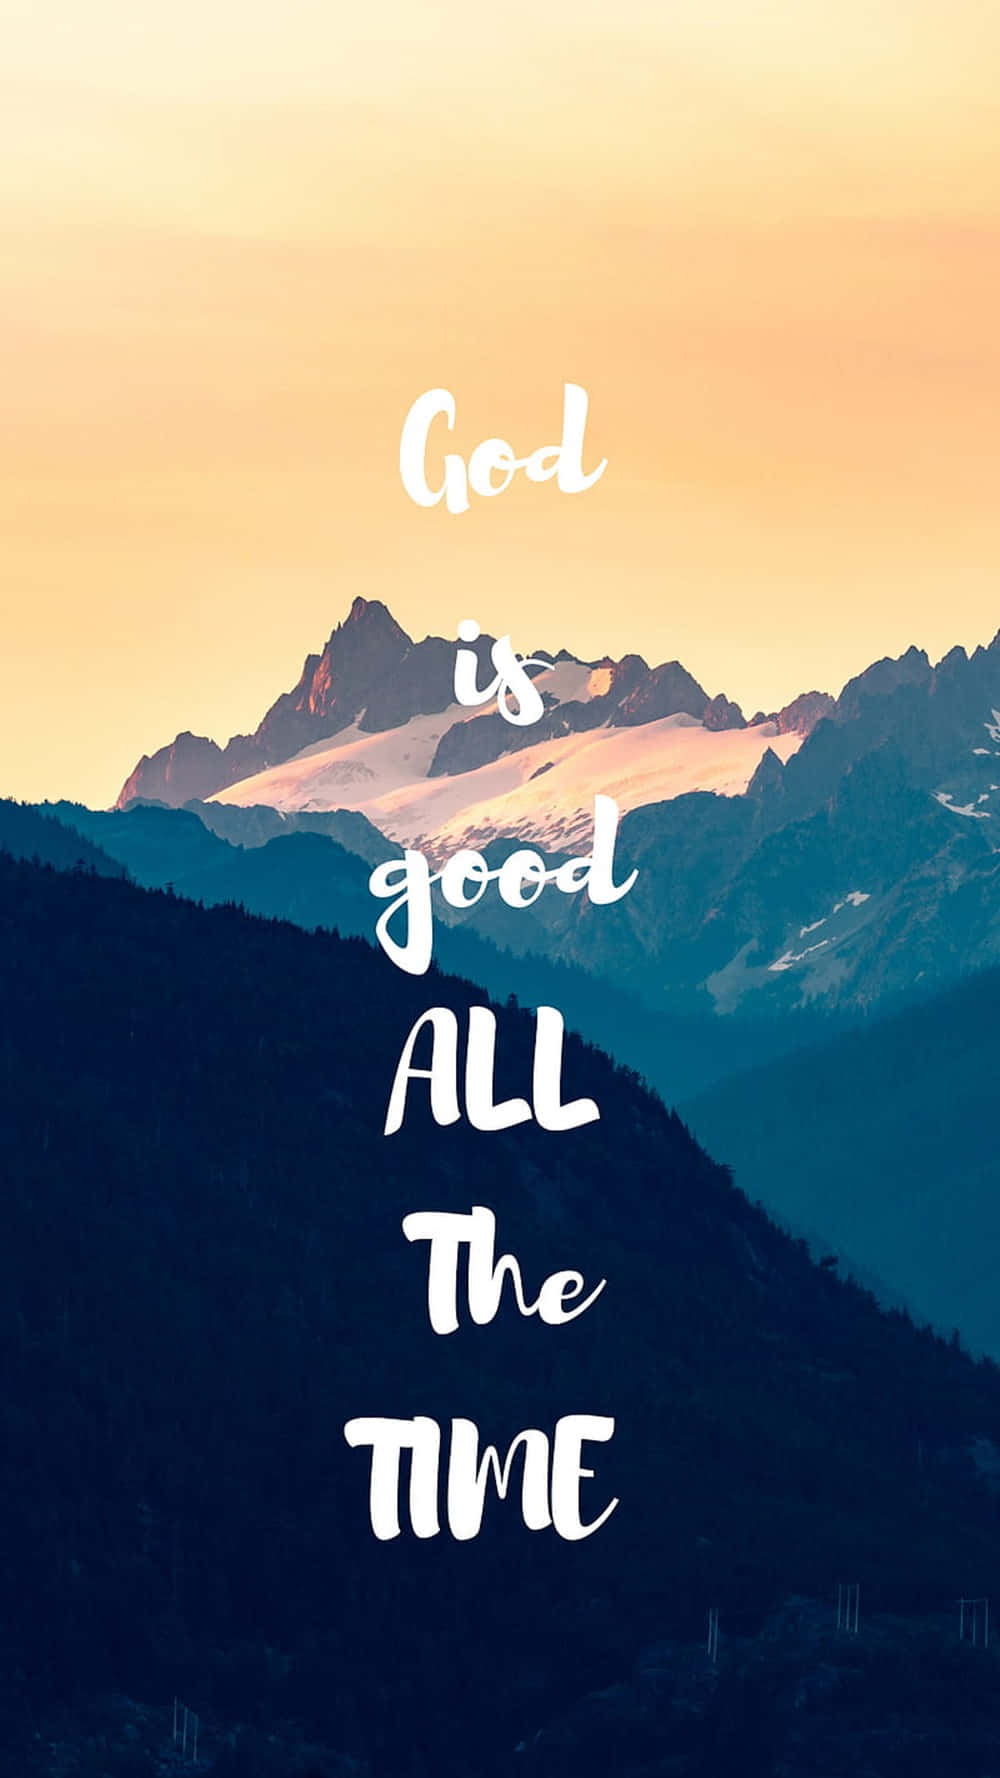 God Is Good Wallpapers  Wallpaper Cave